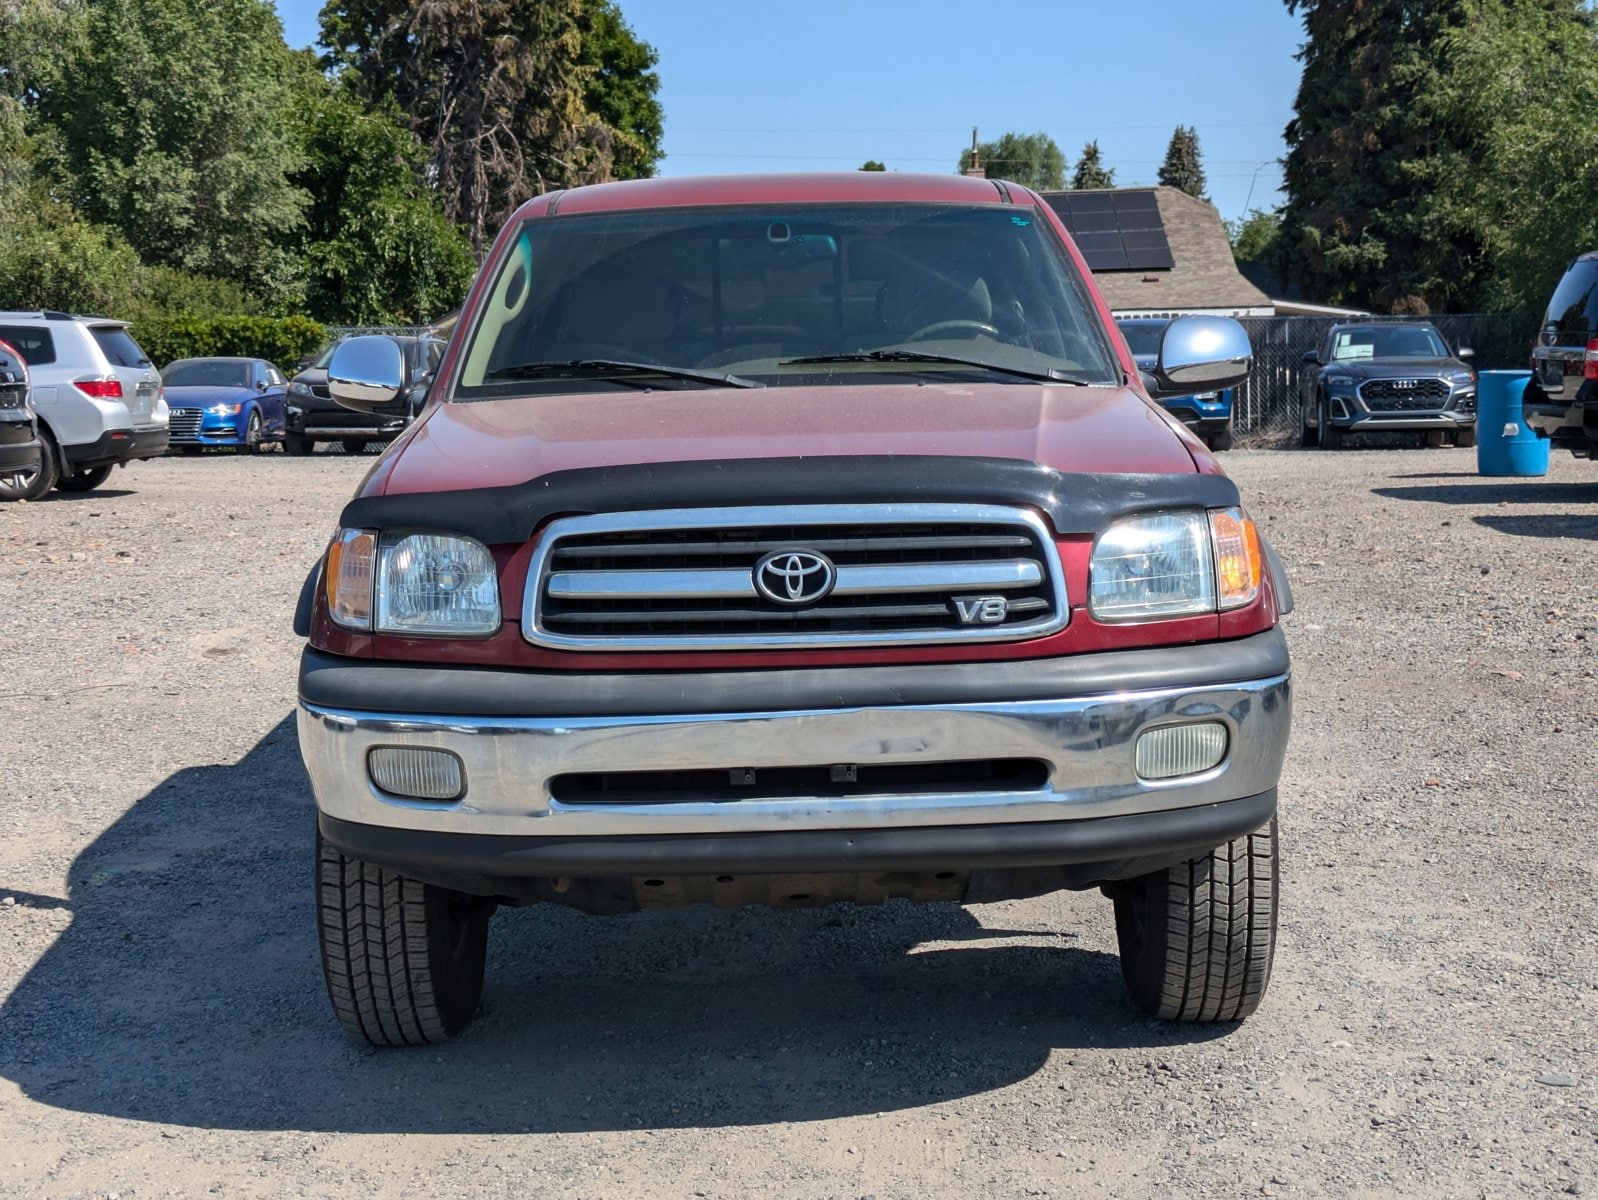 Used 2001 Toyota Tundra SR5 with VIN 5TBBT44171S201525 for sale in Spokane, WA